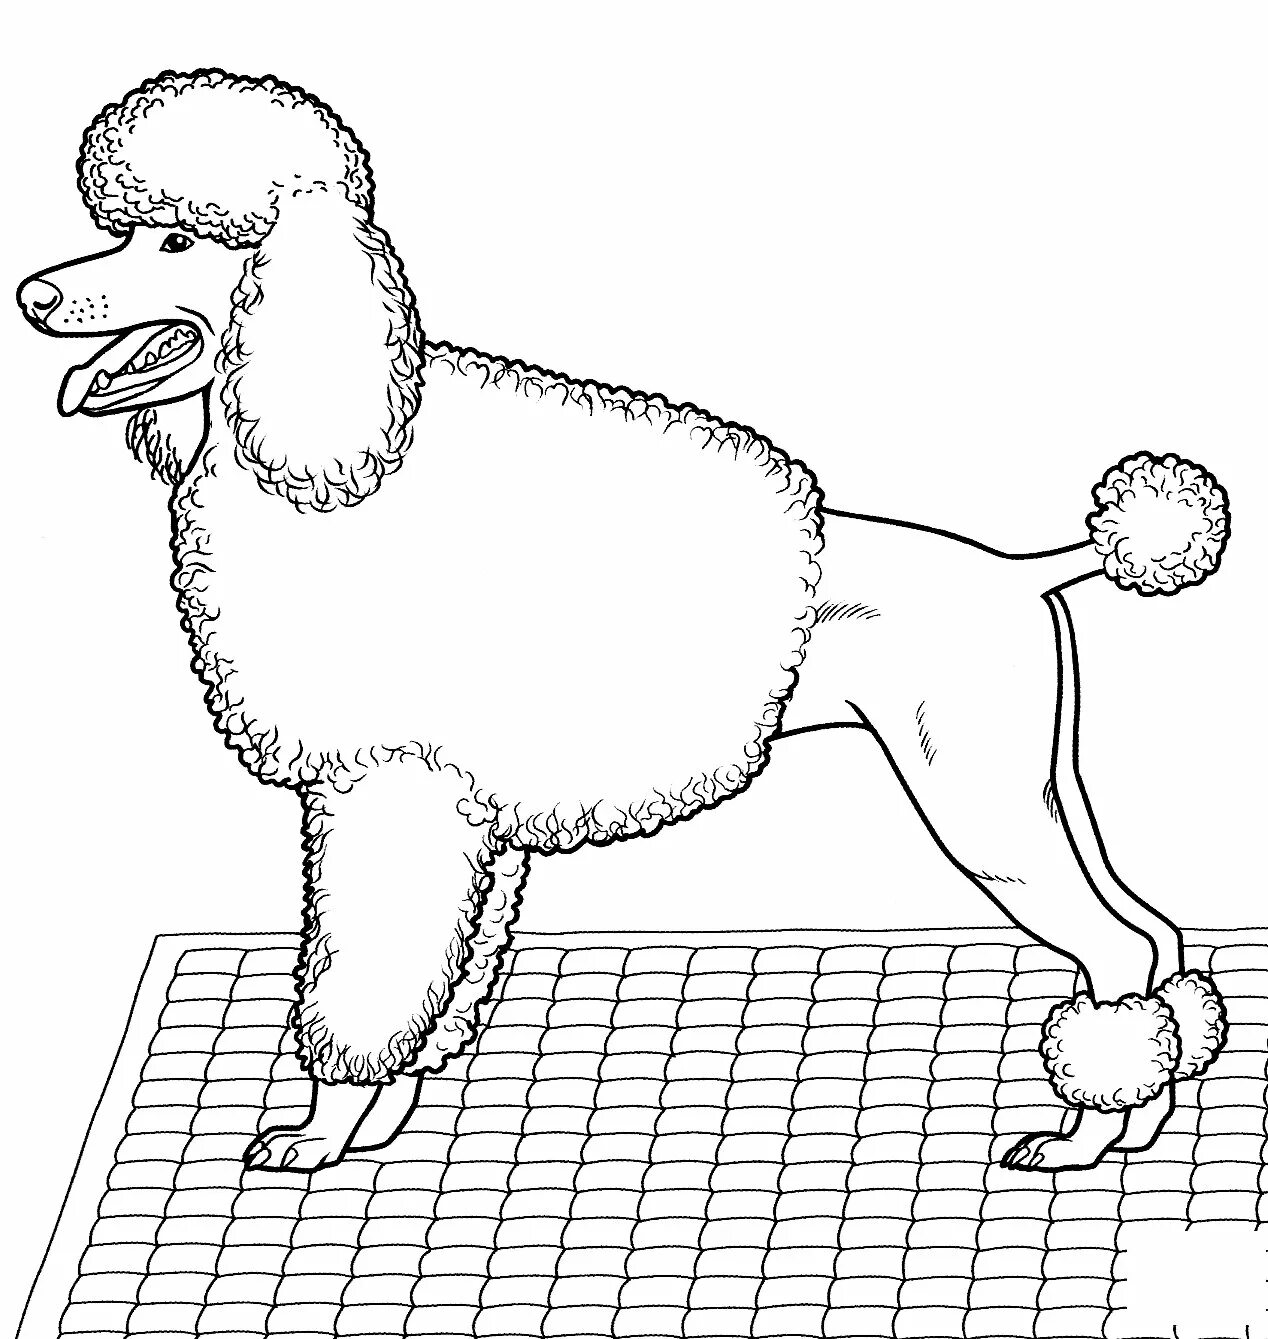 Exciting poodle coloring book for kids